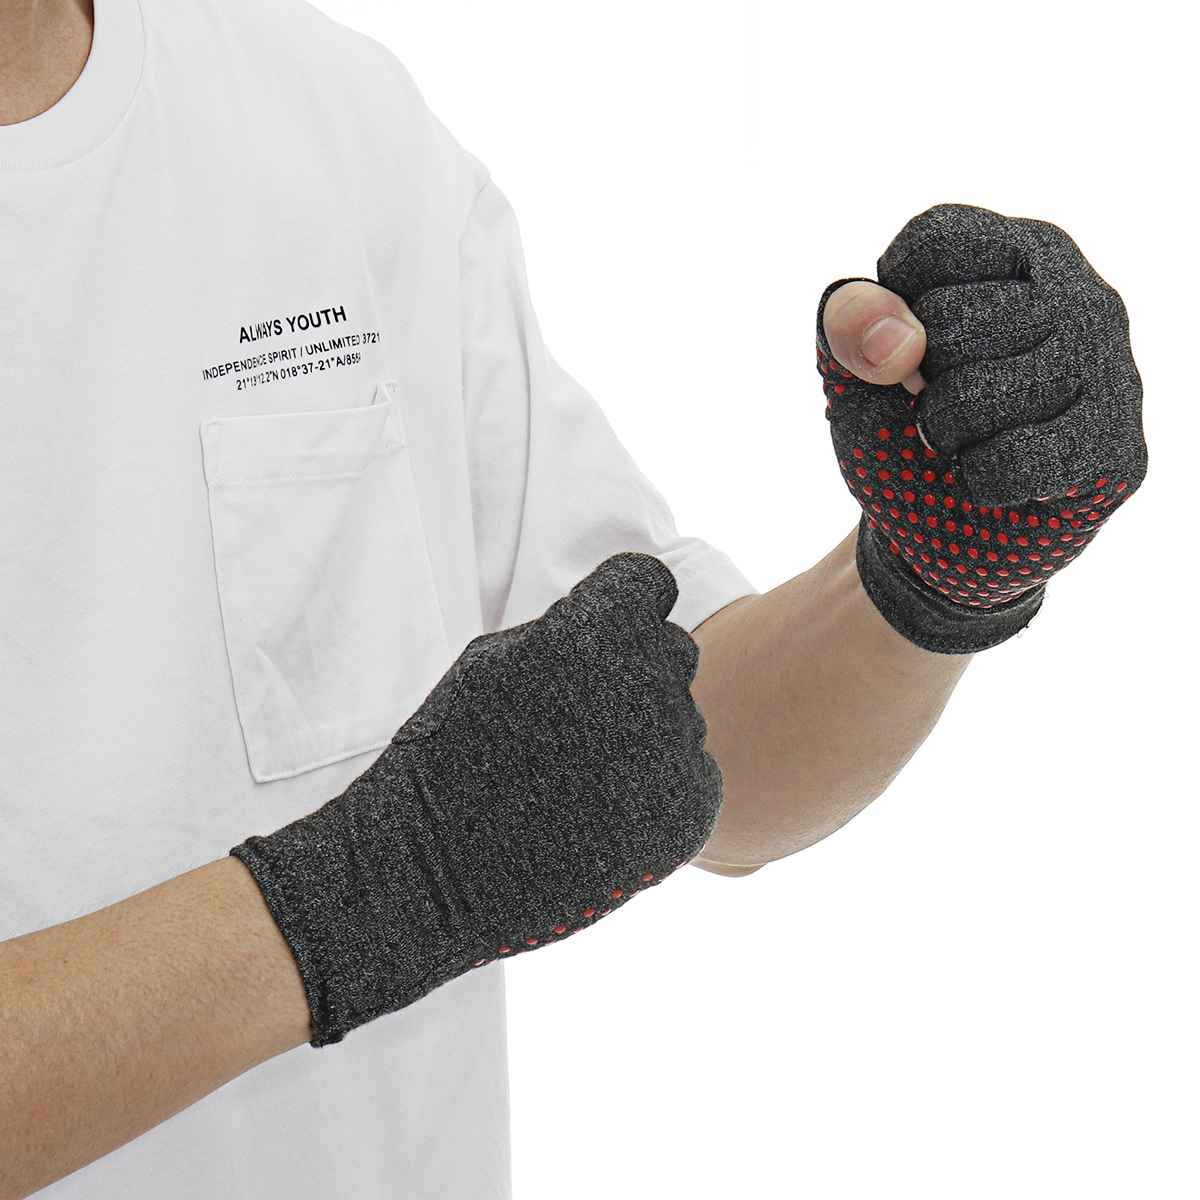 1-Pair-Compression-Arthritis-Gloves-Arthritic-Joint-Pain-Relief-Hand-Gloves-Therapy-Open-Fingers-Com-1777634-11